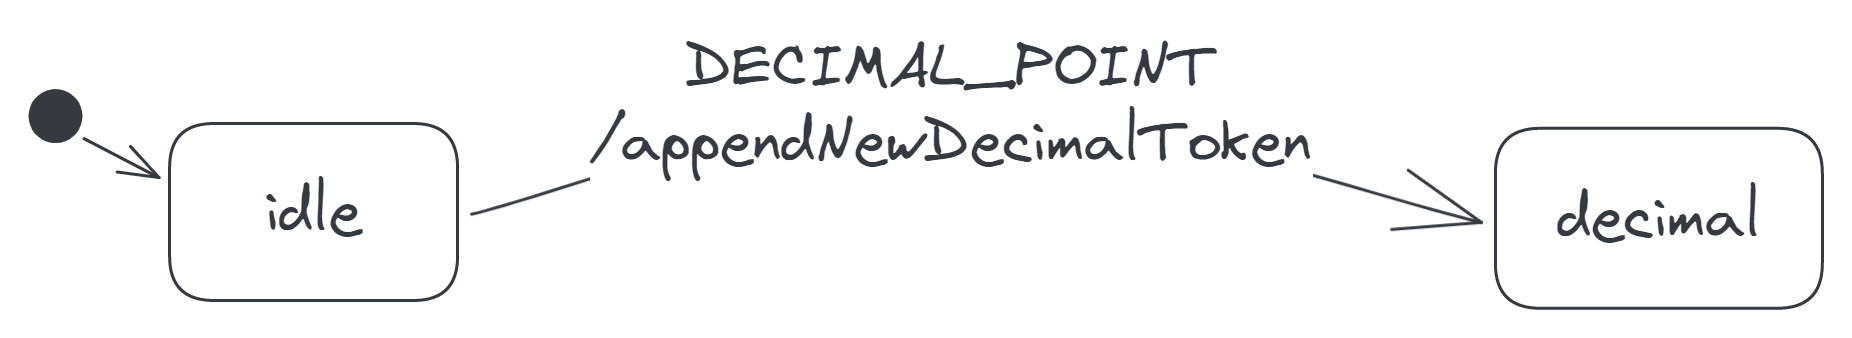 A transition labelled 'DECIMAL_POINT/appendNewDecimalToken', from the idle to the decimal state.